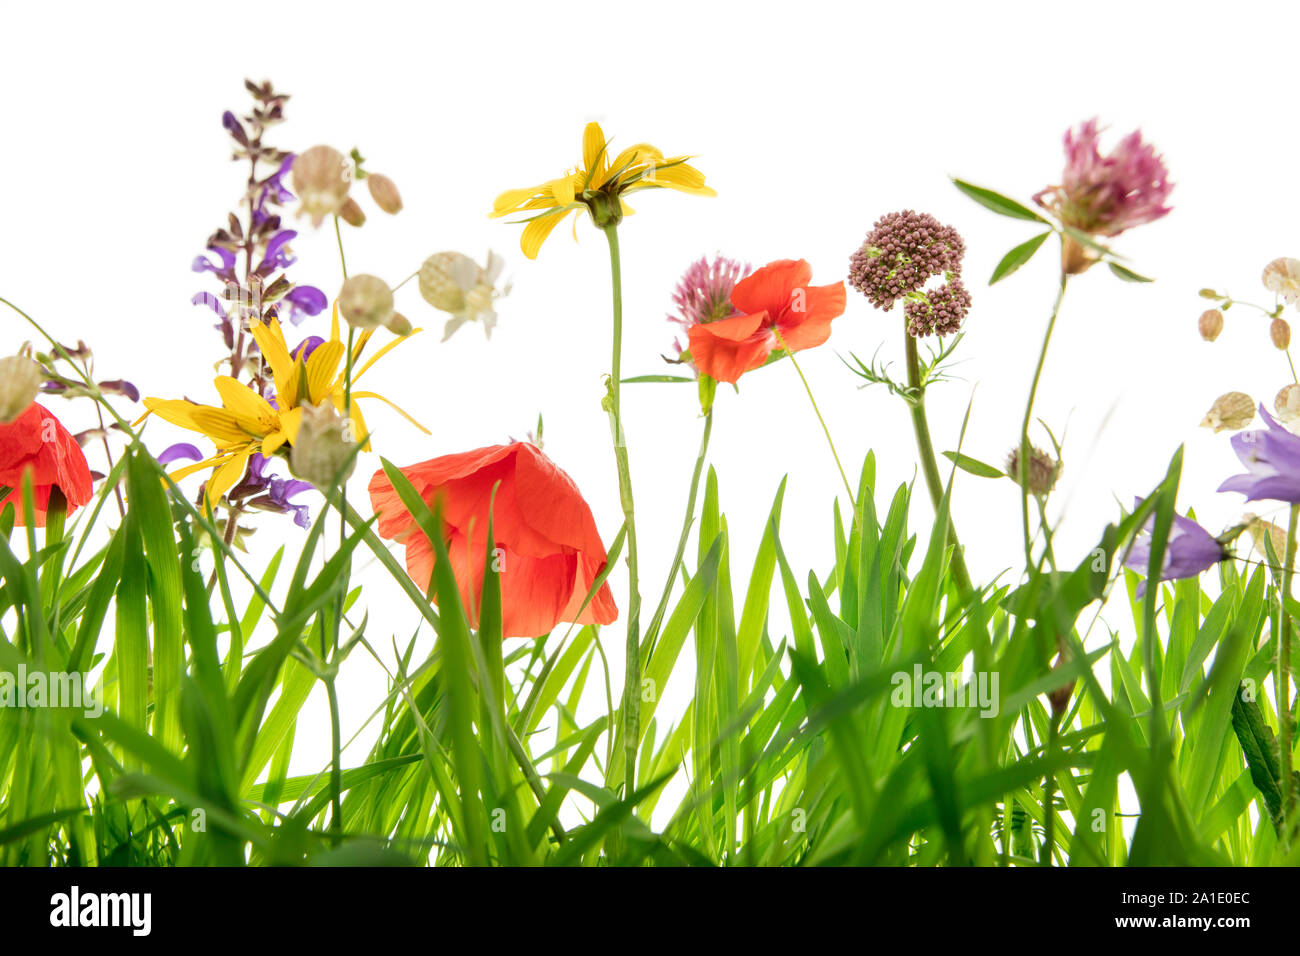 Closeup, lots of wild spring meadow with flowers and grass blades, white background Stock Photo